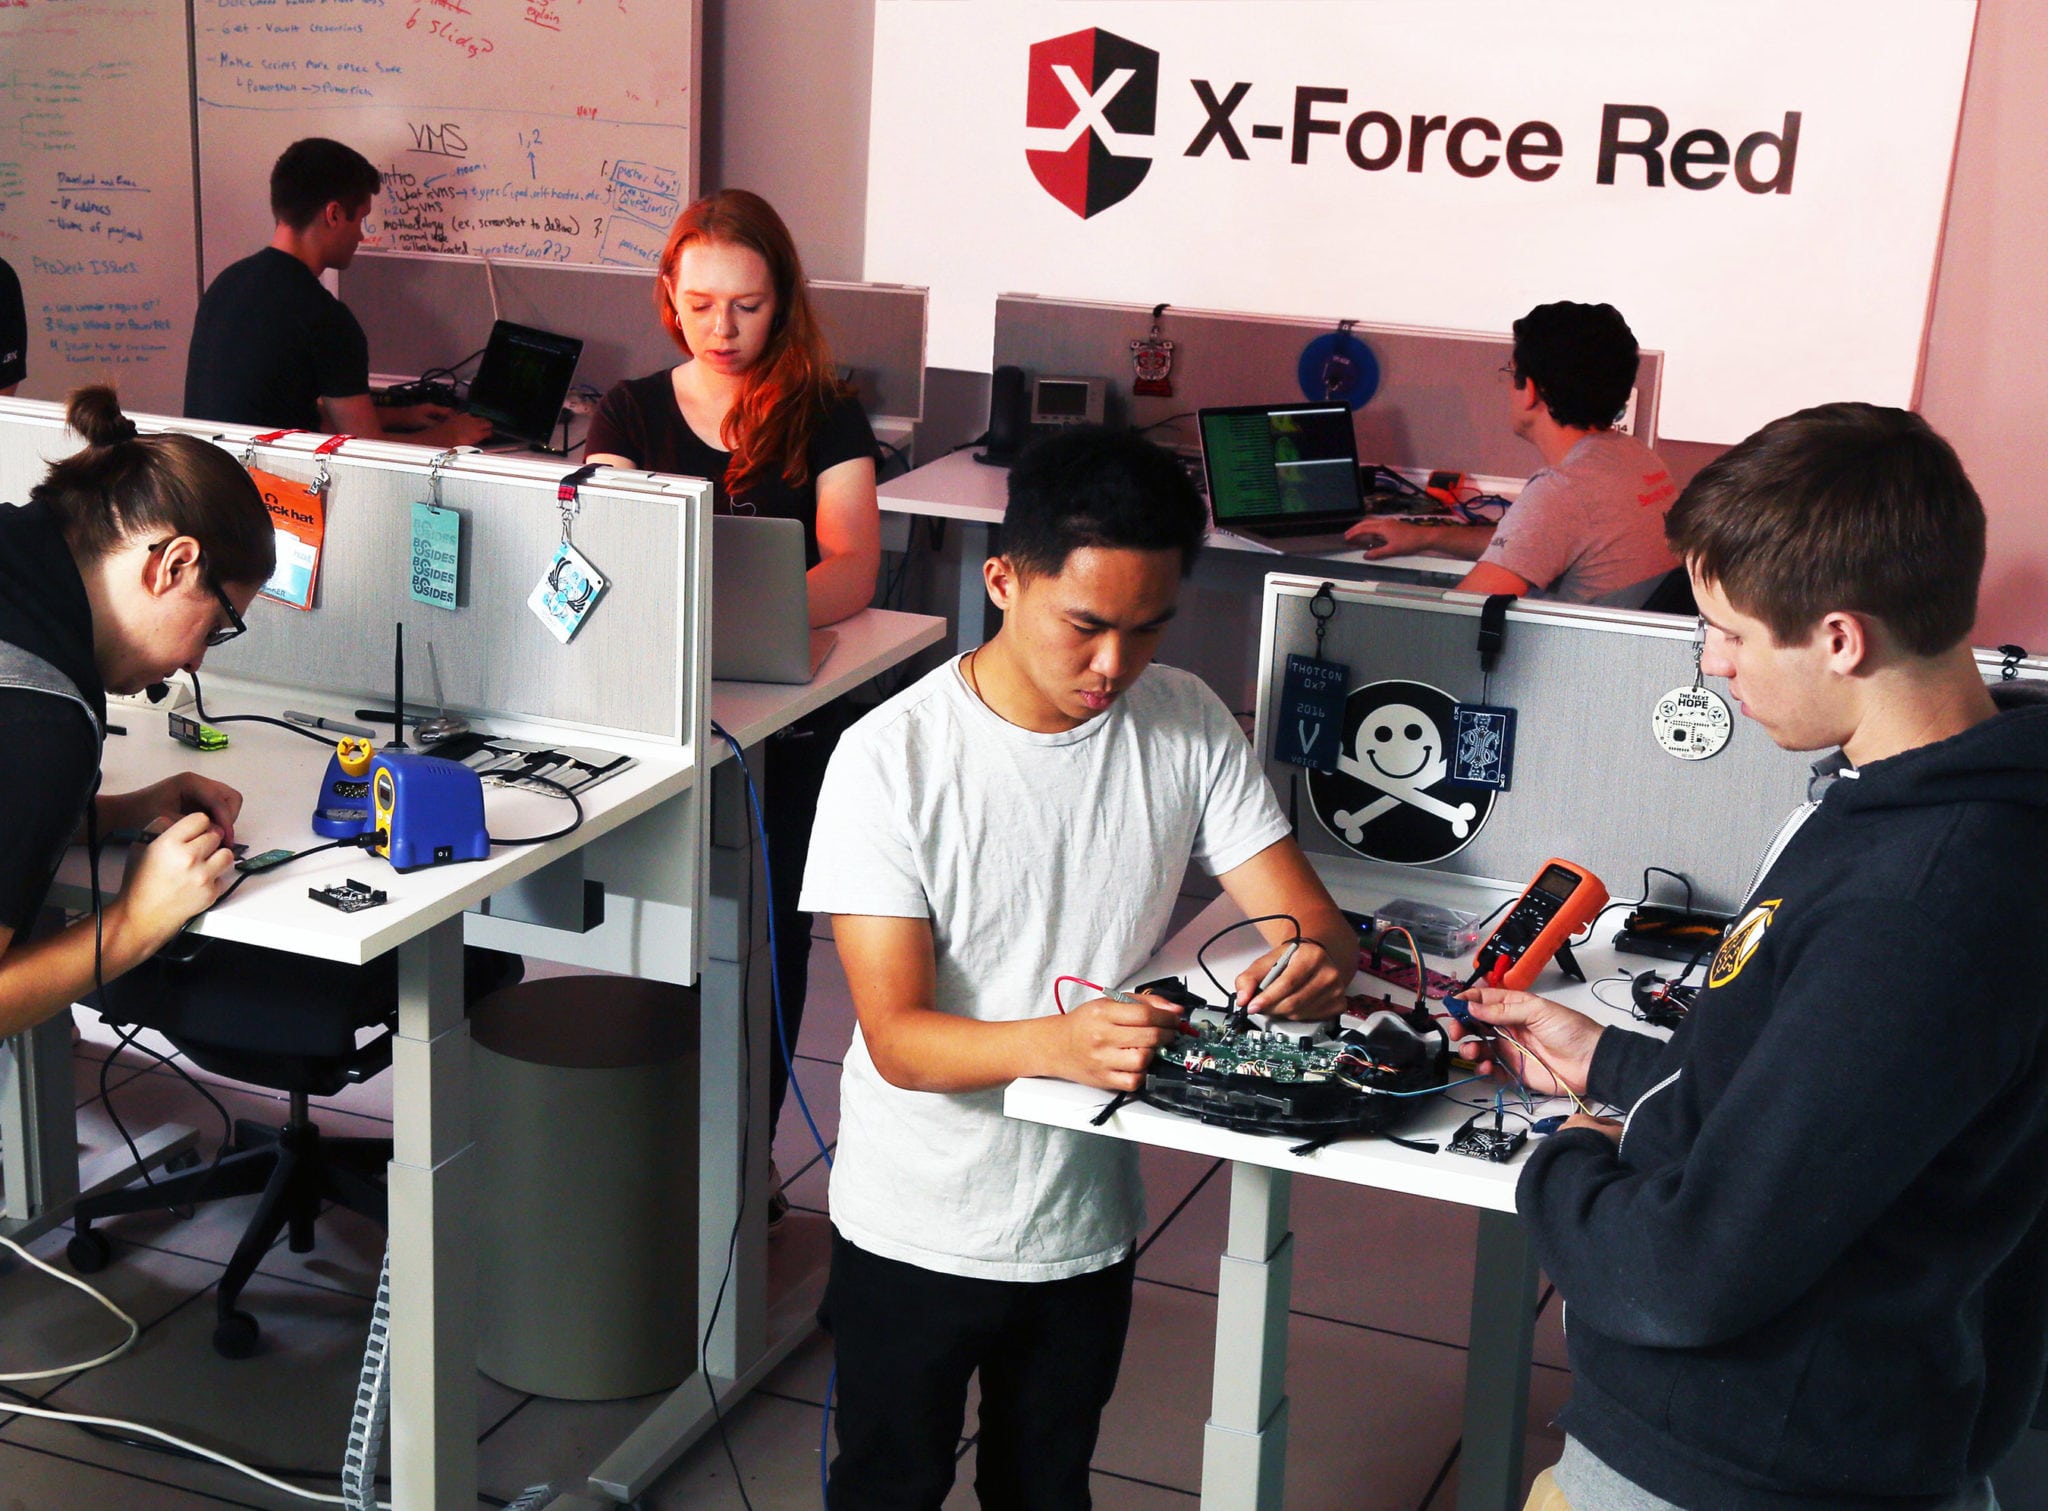 IBM opens four new X-Force Red hacking facilities to take fight to IoT cyber criminals - RCR Wireless